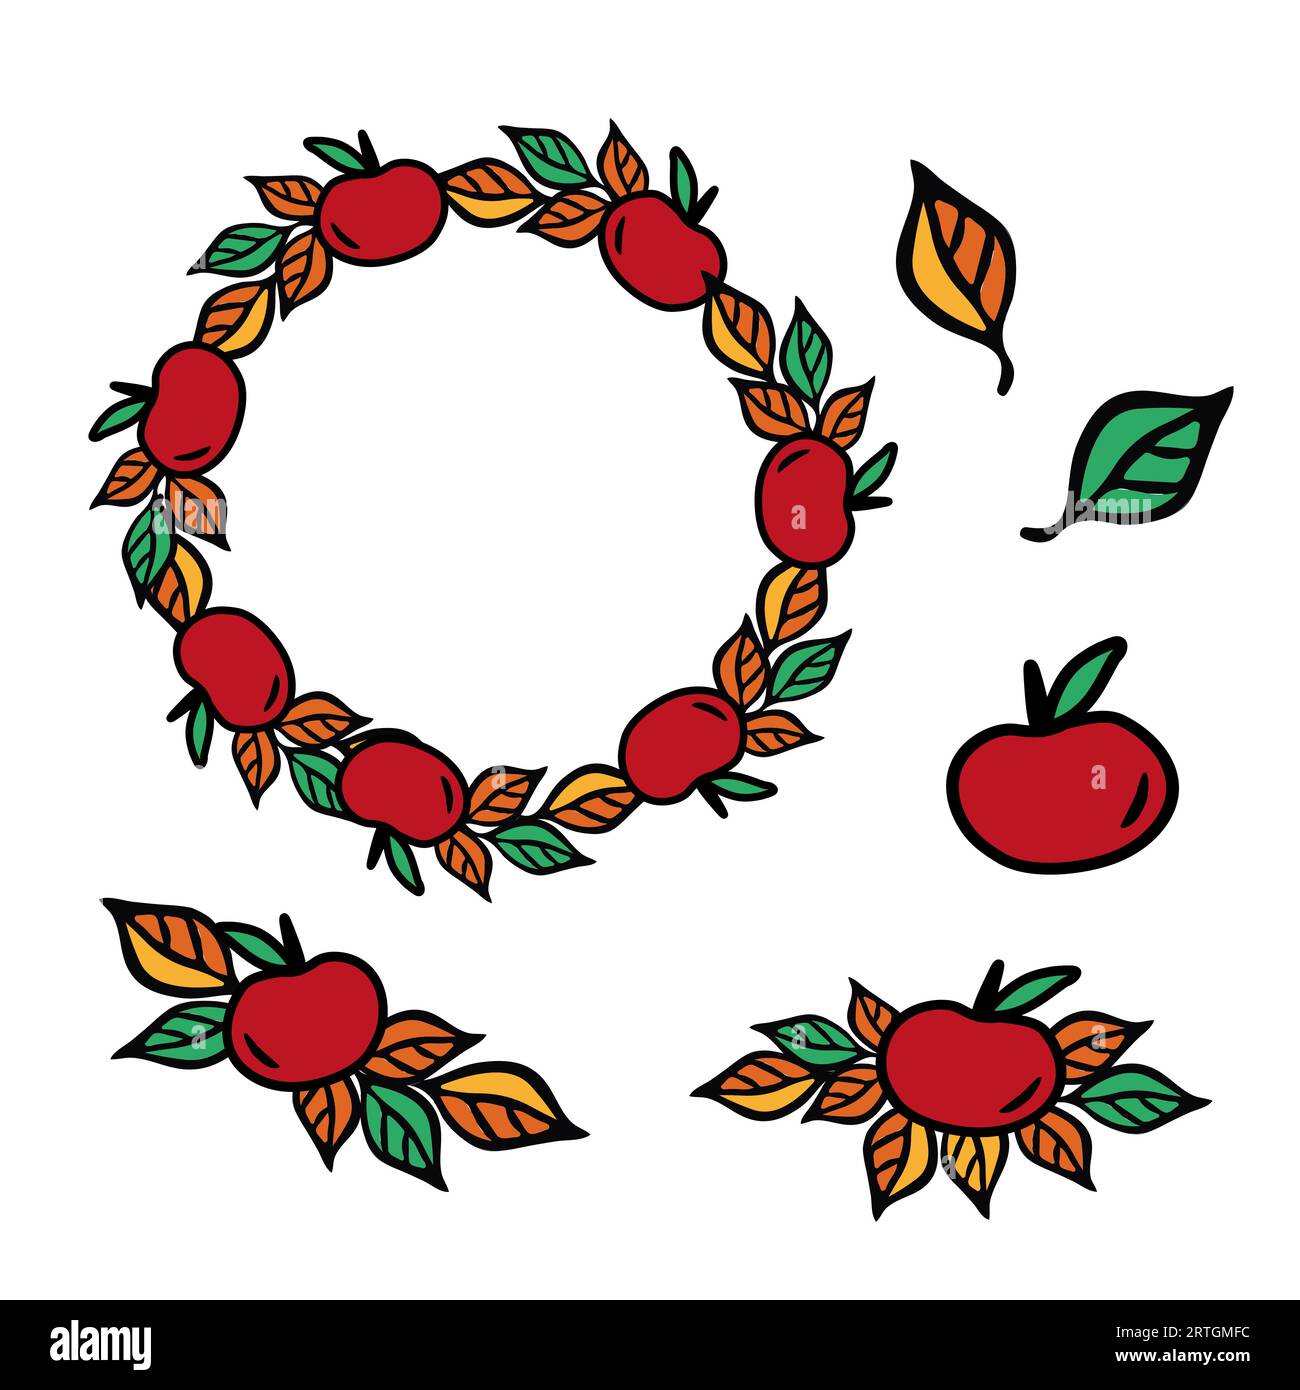 Red apple clip art. Fall harvest wreath , hand drawn vector illustration for card or invite Stock Vector